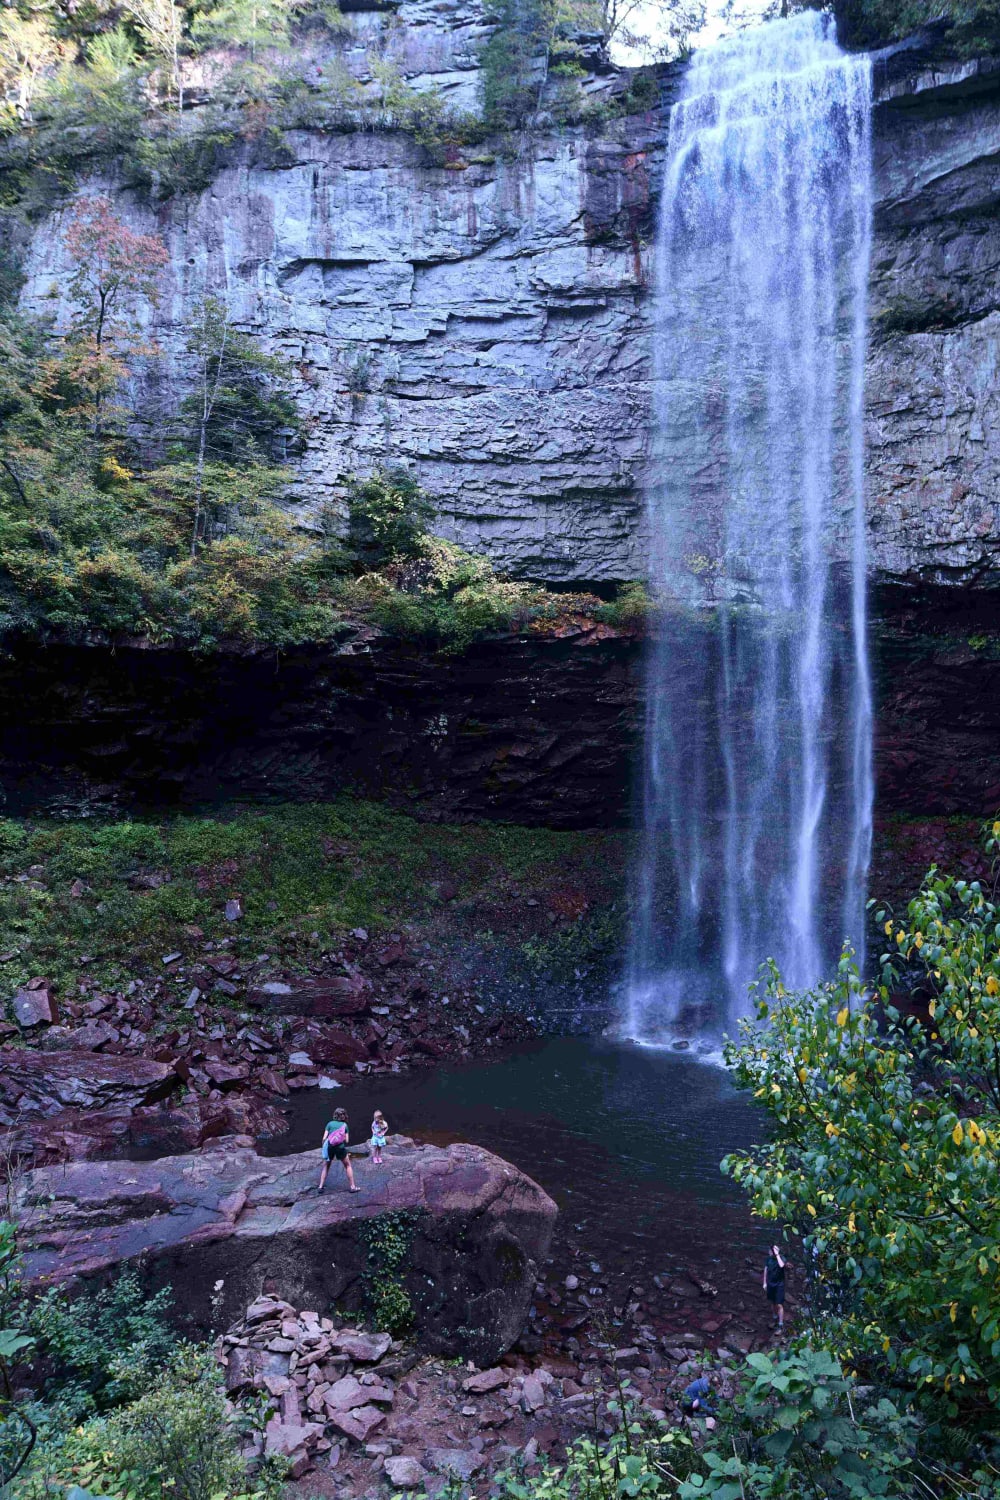 The plunge pool at Fall Creek Falls in Tennessee